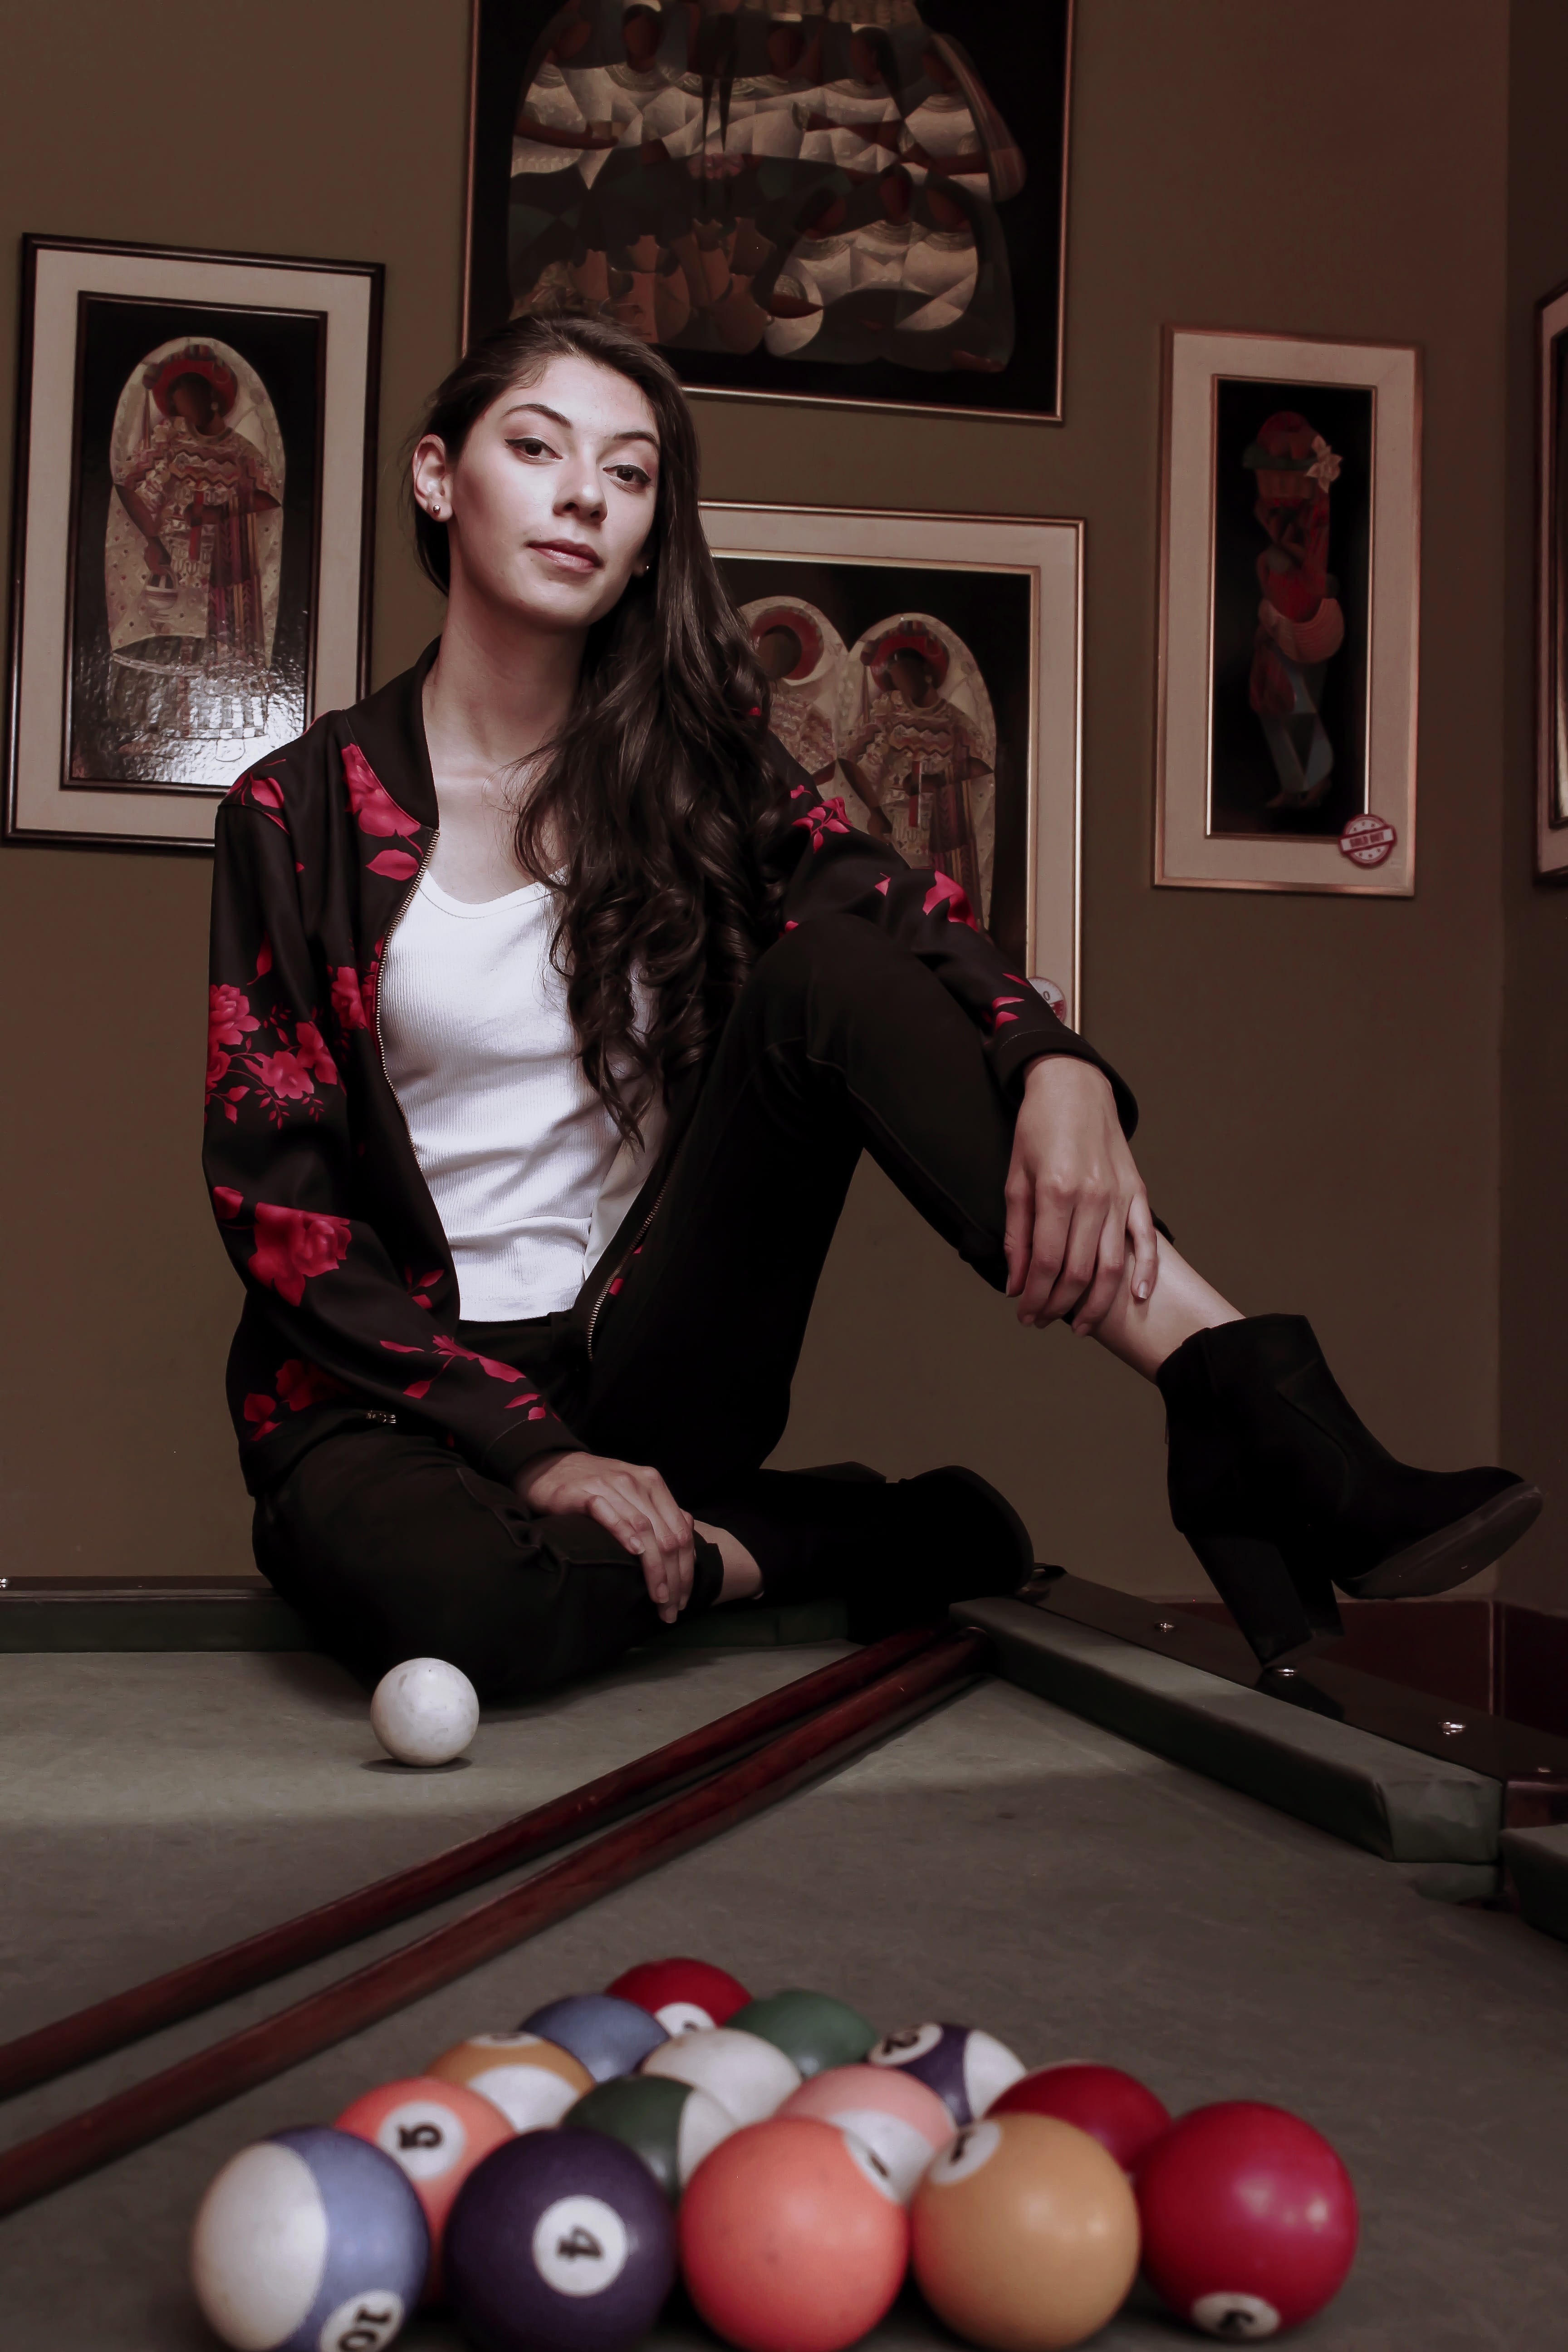 Attractive model posing on a wooden billiards table